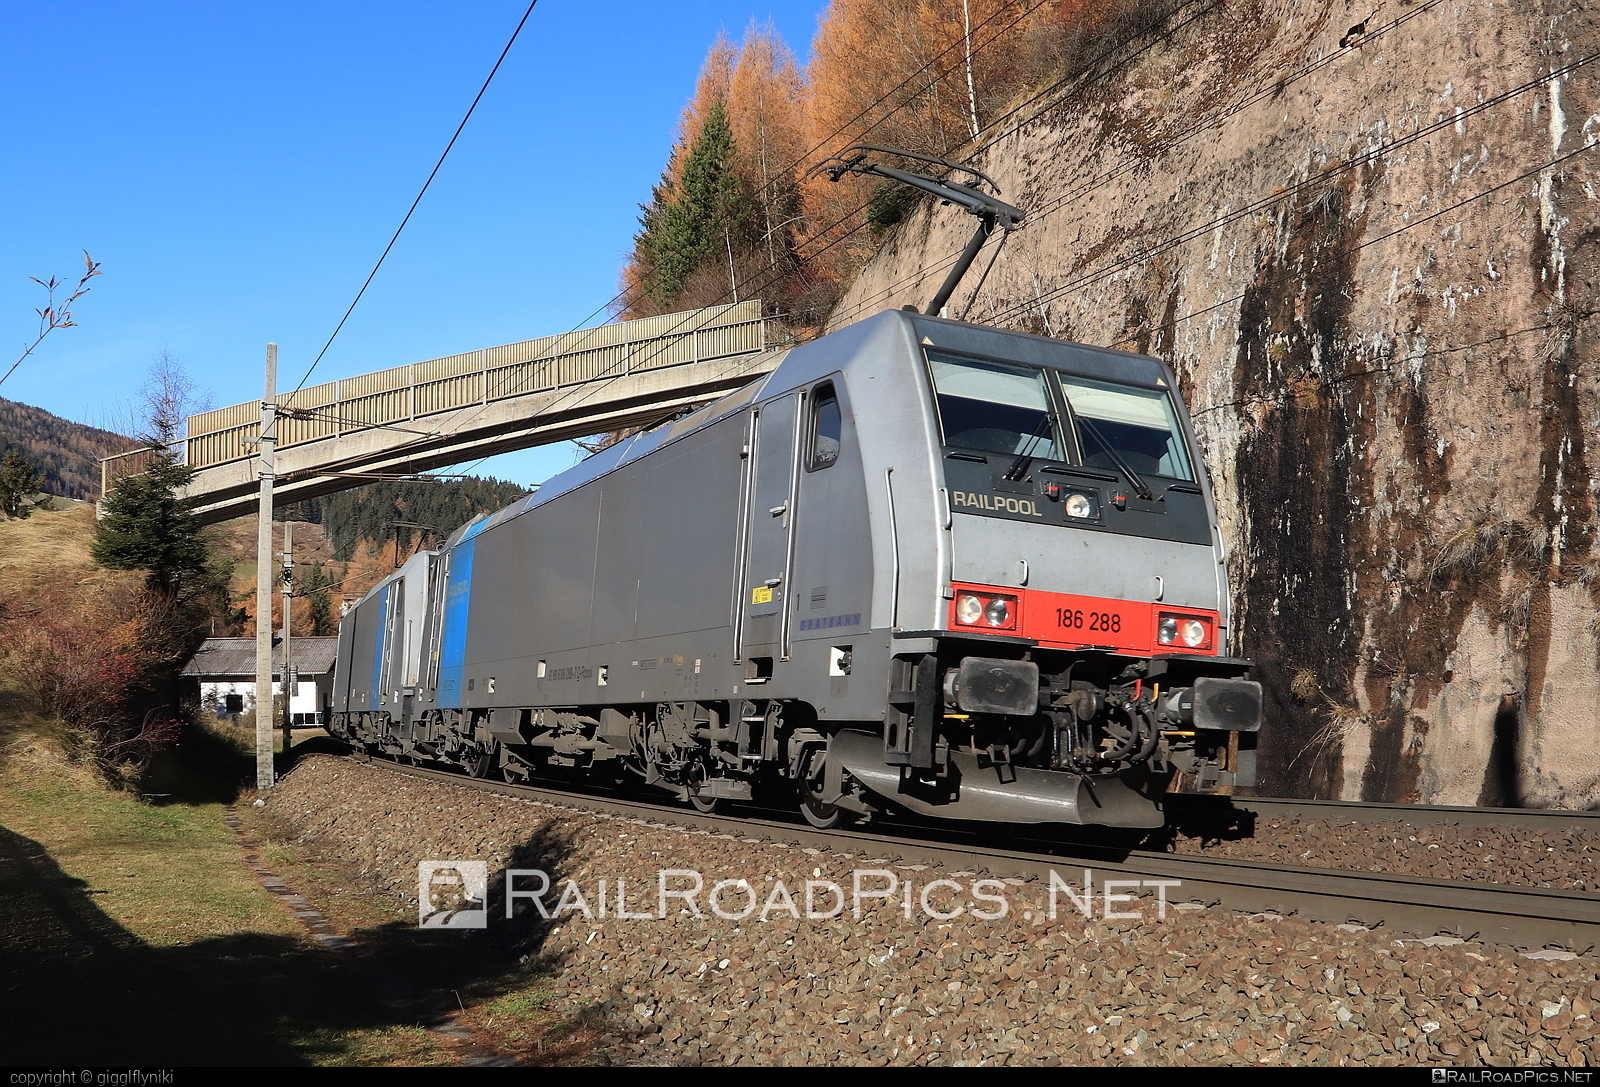 Bombardier TRAXX F140 MS - 186 288 operated by Rail Cargo Carrier – Italy s.r.l #bombardier #bombardiertraxx #railpool #railpoolgmbh #rccit #traxx #traxxf140 #traxxf140ms